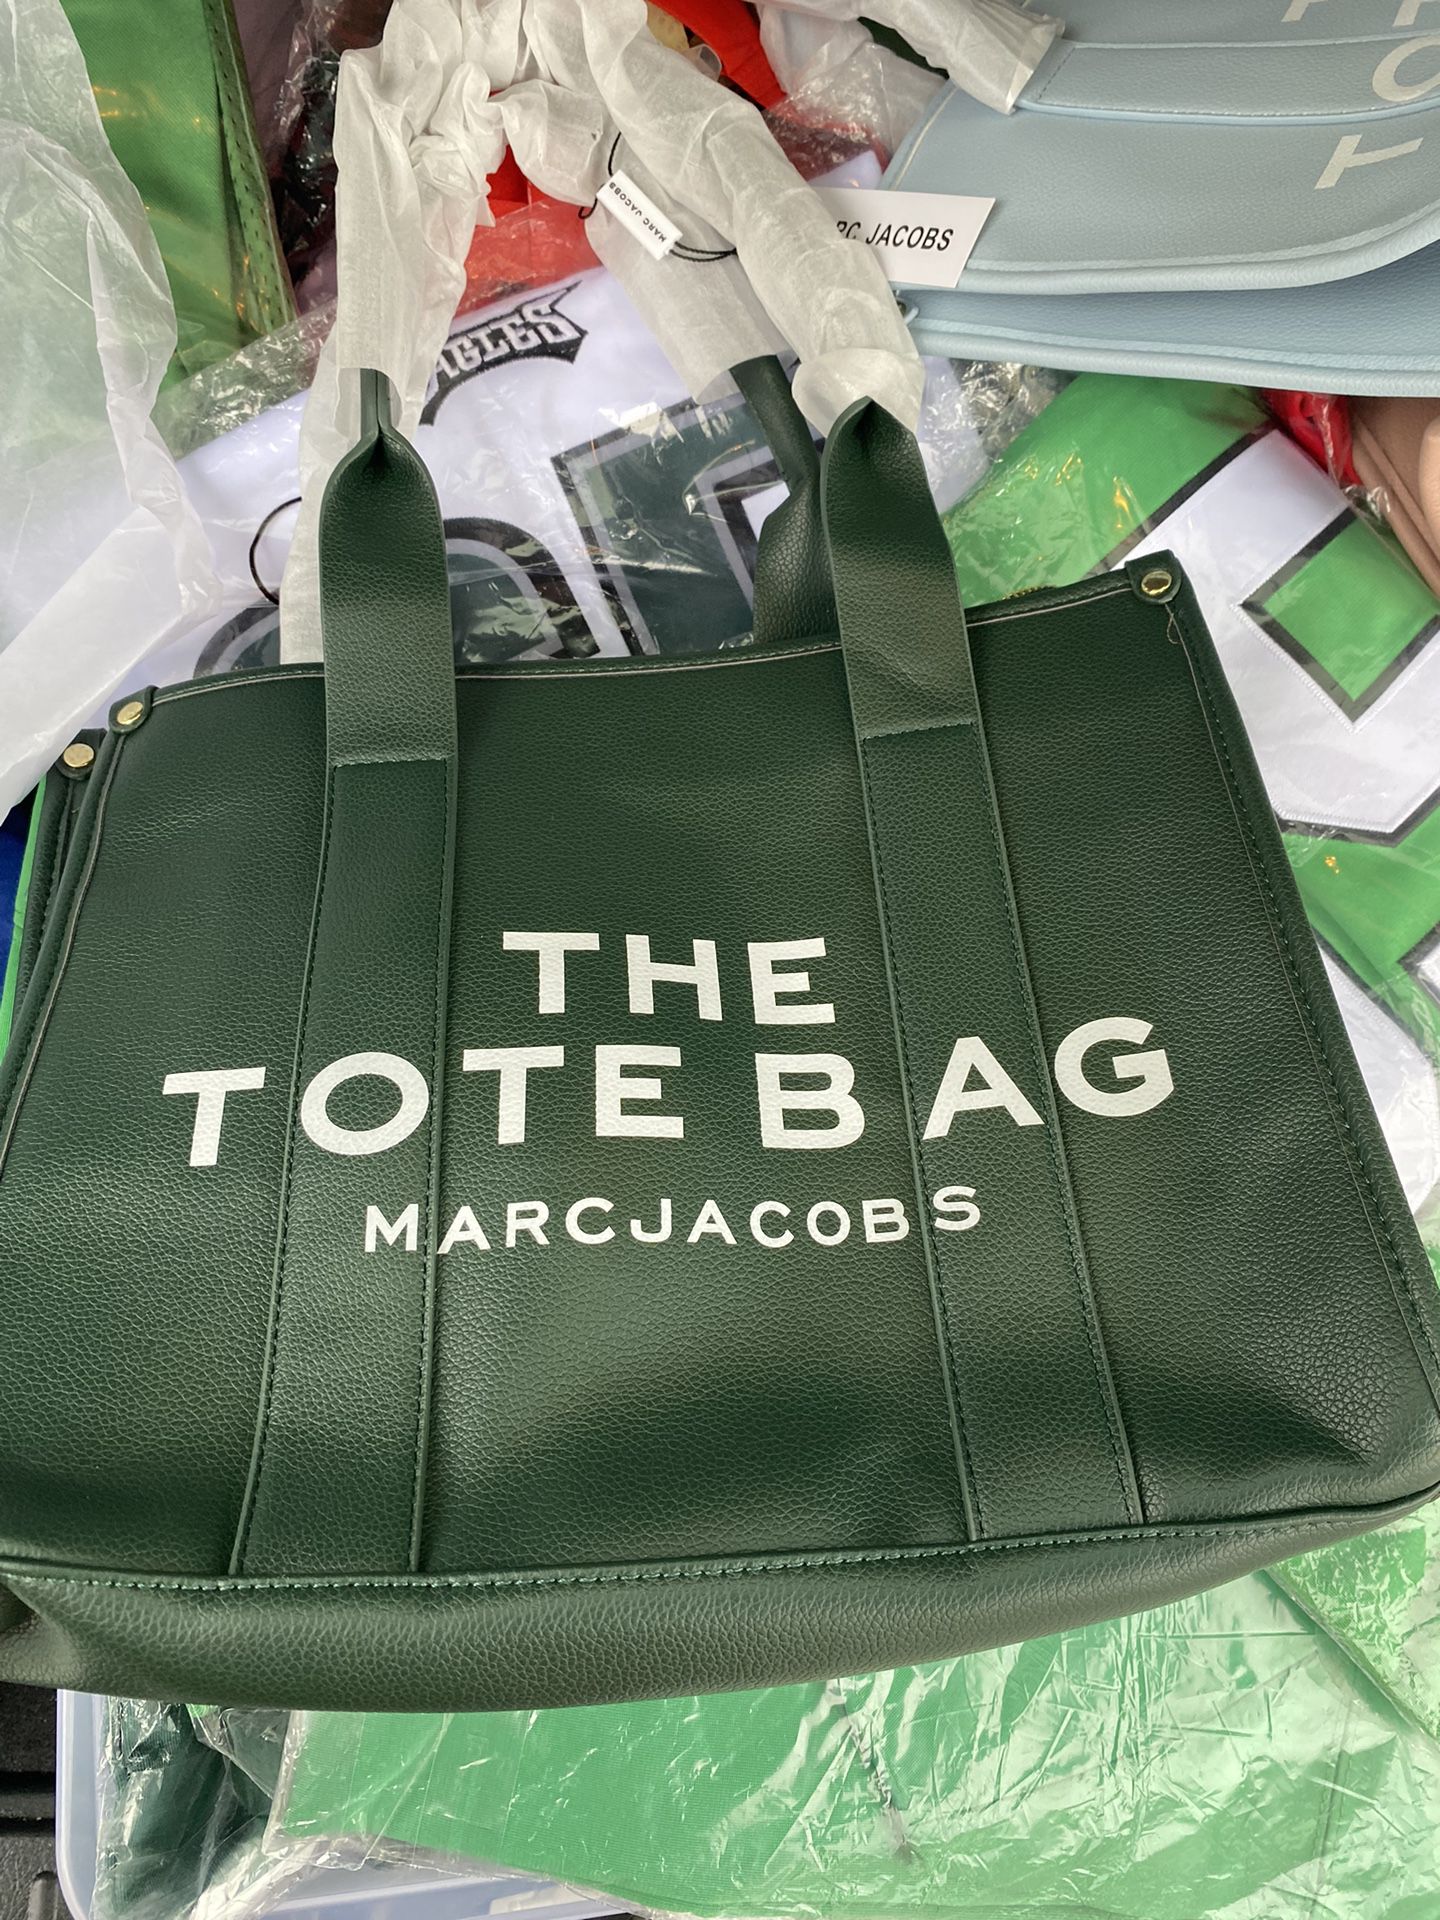 The Tote bag Marc Jacobs